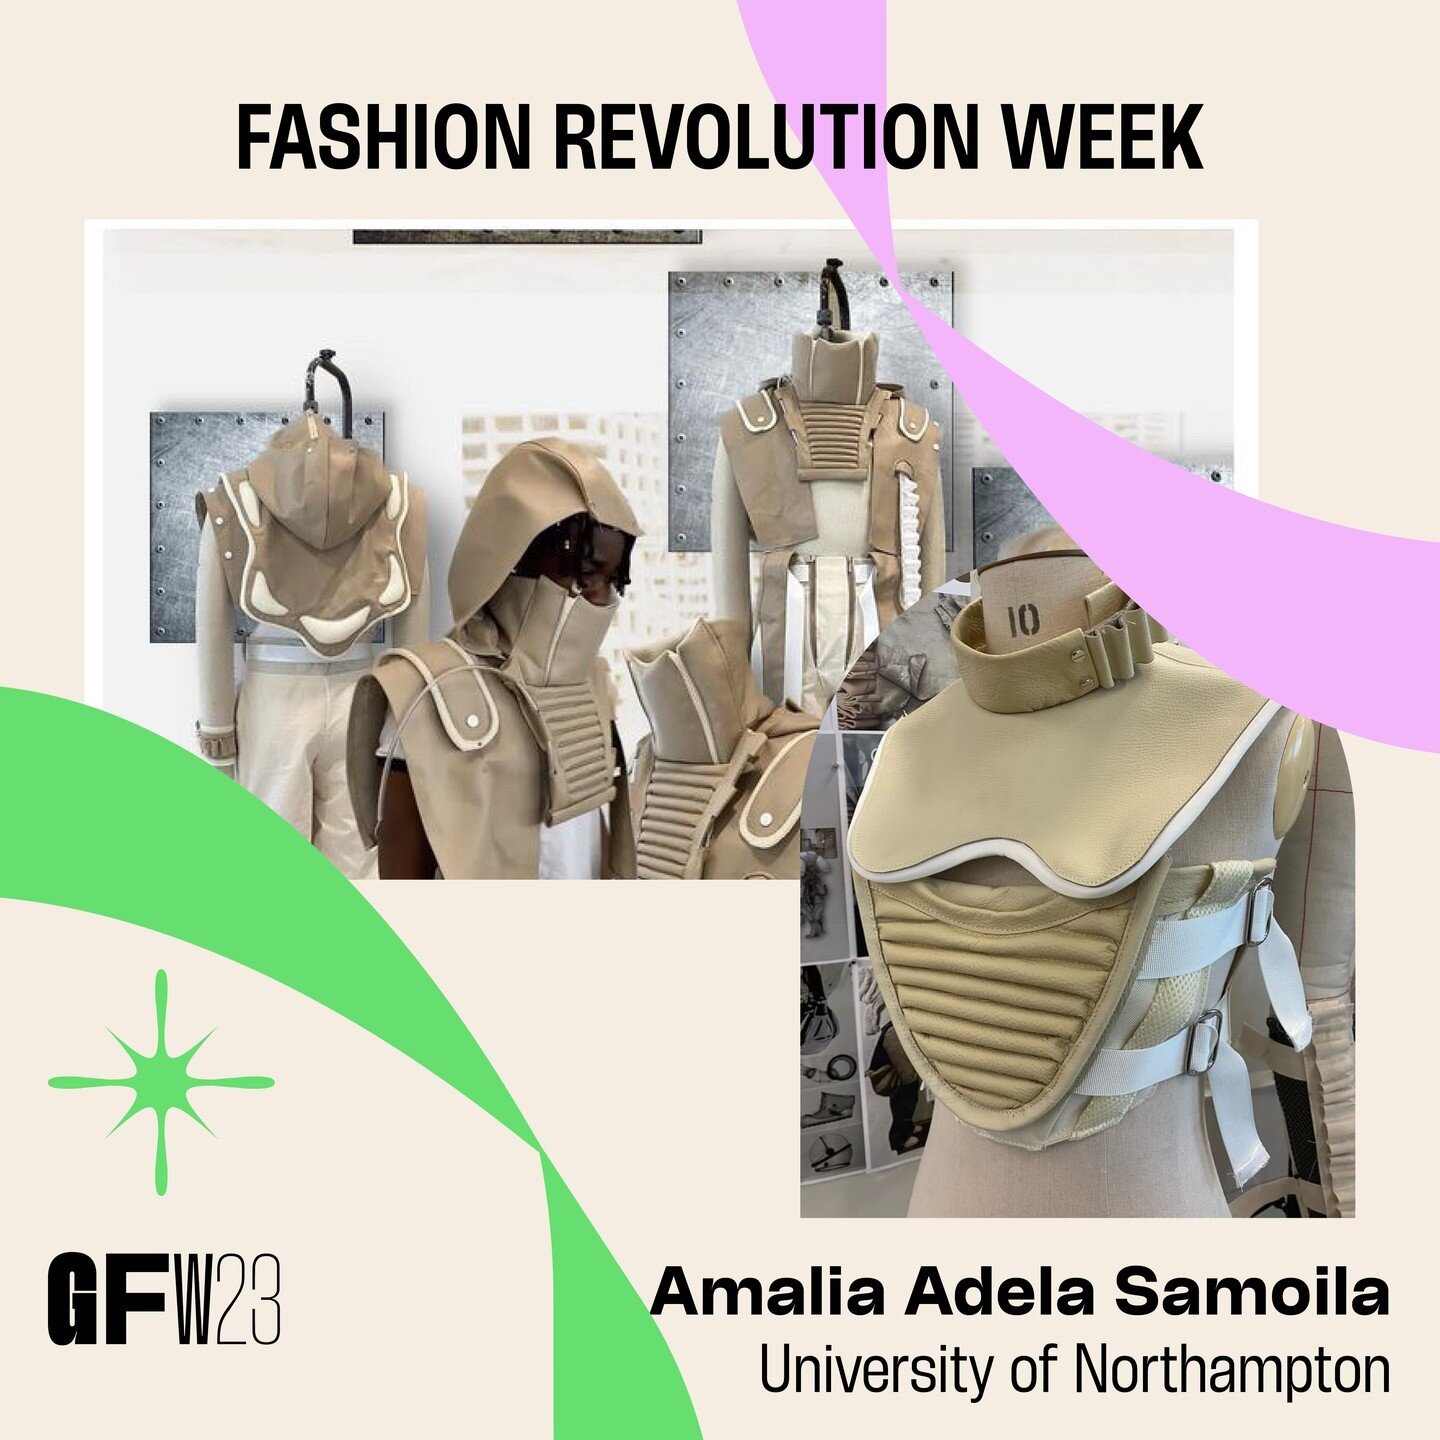 To celebrate #FashionRevolutionWeek we're highlighting student work that centres around fashion activism 👏

Amalia Adela Samoila is a Fashion student at the University of Northampton and their collection 'Aambivert' brings awareness to adopting sust